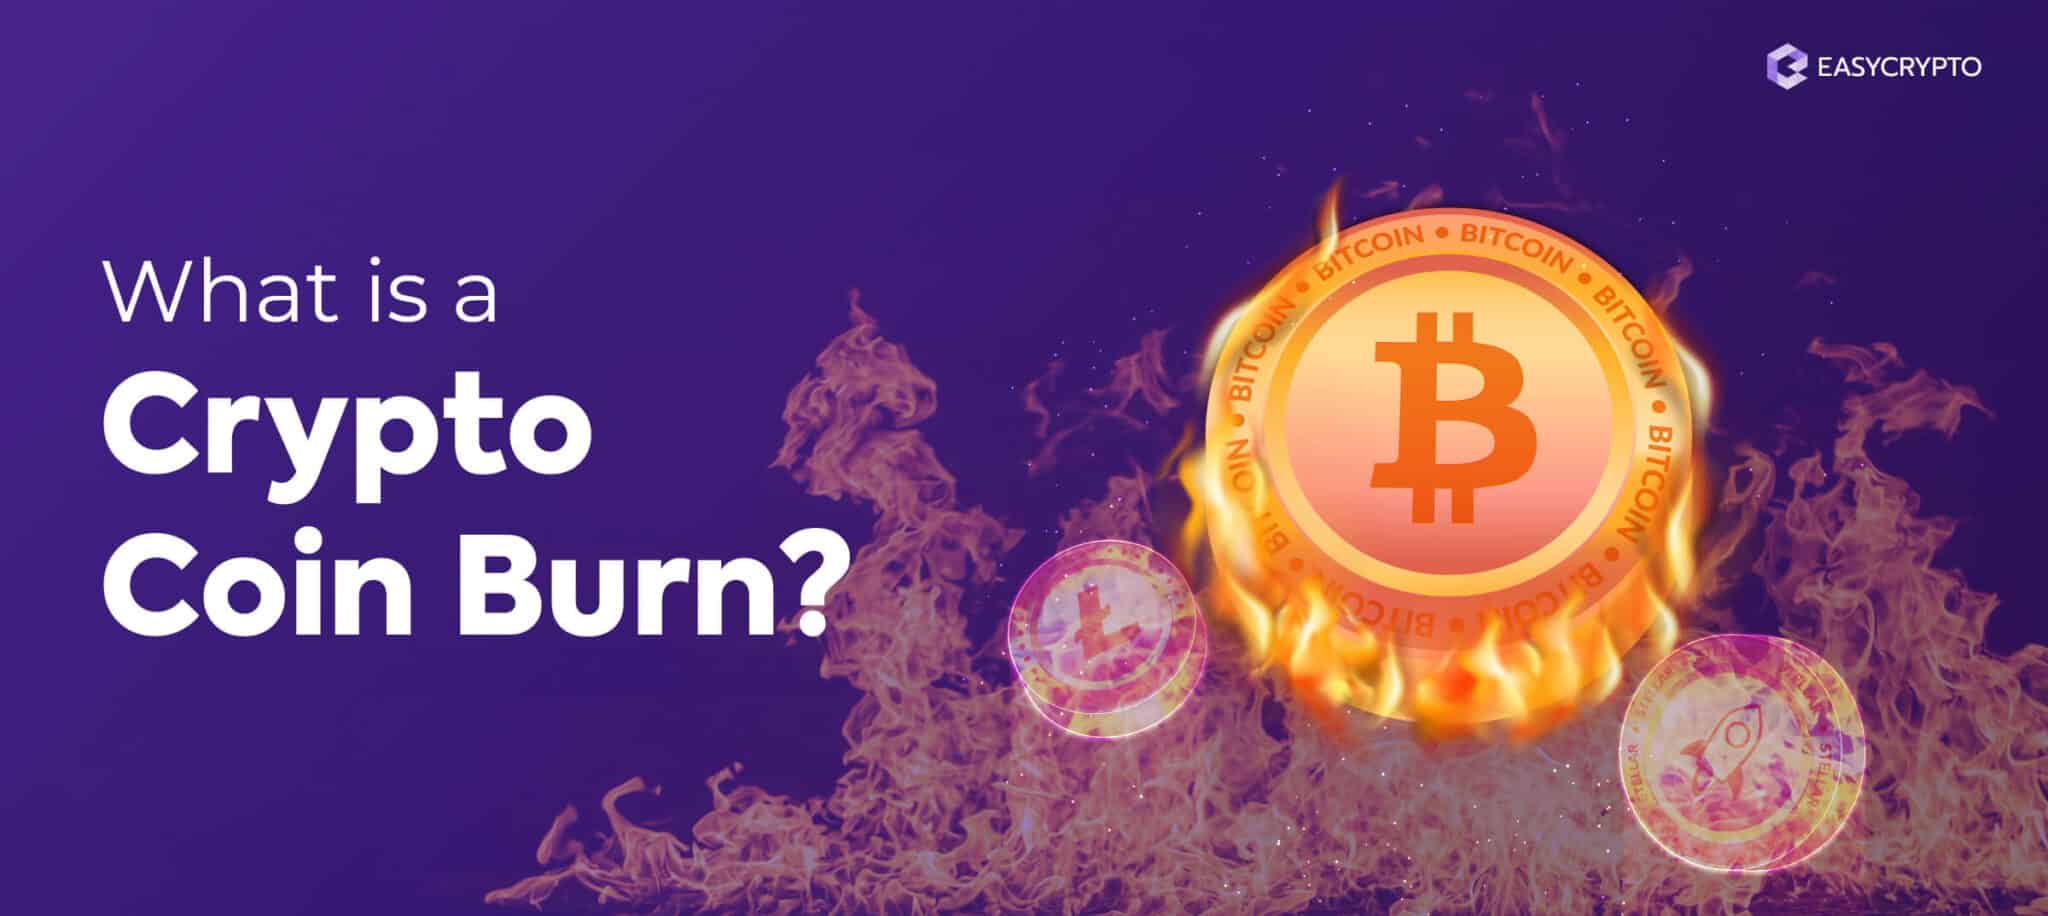 proof of burn crypto currency value